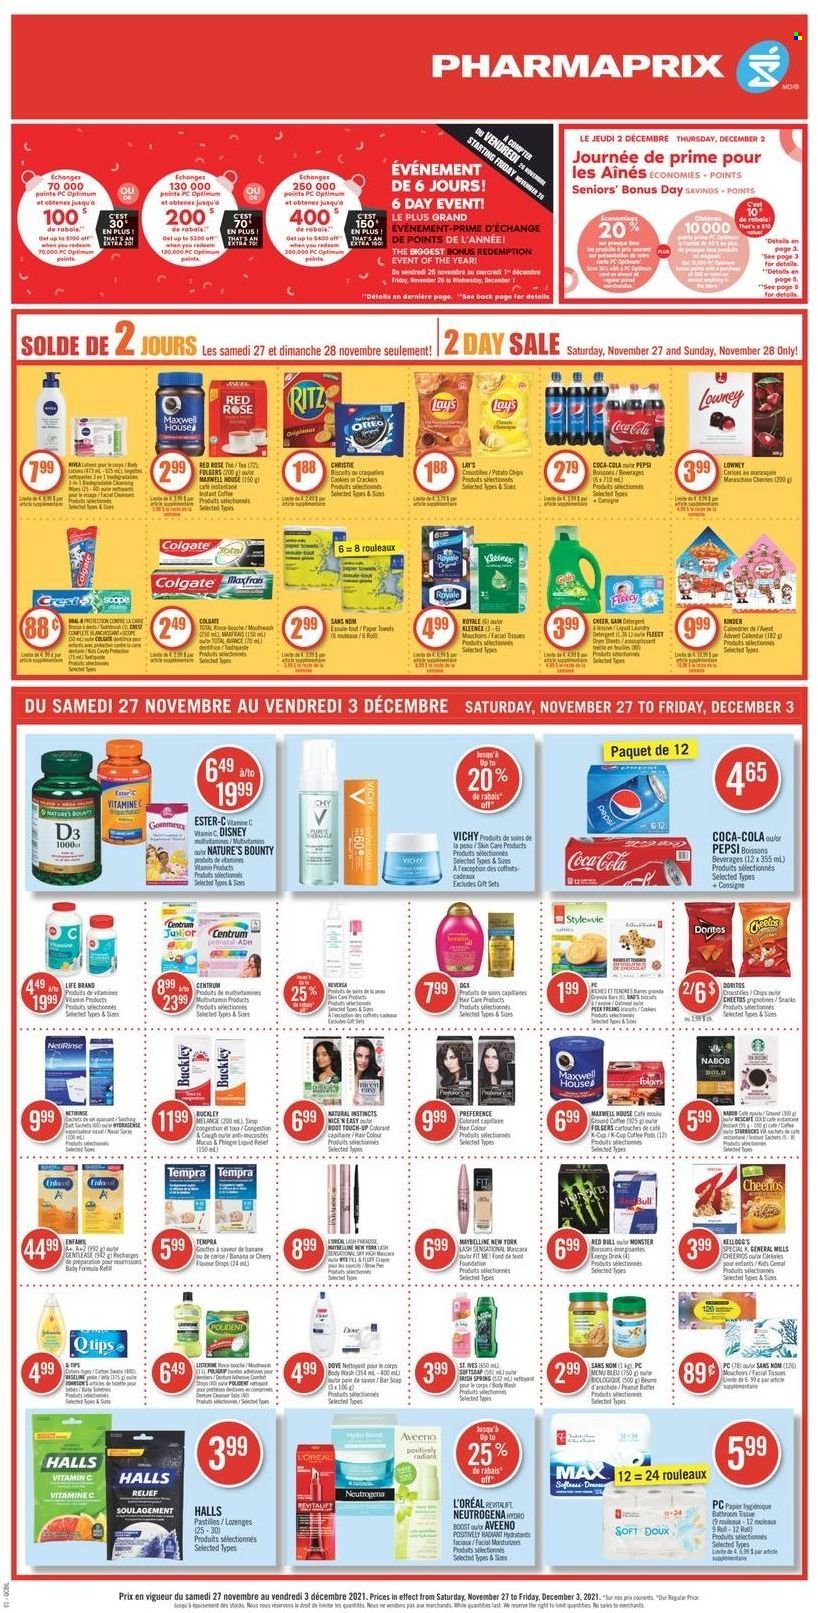 Pharmaprix Flyer - November 27, 2021 - December 03, 2021 - Sales products - cake, Disney, Halls, pastilles, RITZ, Doritos, Cheetos, Lay's, Cheerios, Coca-Cola, Pepsi, Monster, Red Bull, Boost, Folgers, rosé wine, Aveeno, Gain, Vichy, Polident, L’Oréal, Root Touch-Up, toys, rose, Nature's Bounty, vitamin c, vitamin D3, Centrum, Oreo, Dove, Colgate, Maybelline, Neutrogena. Page 1.